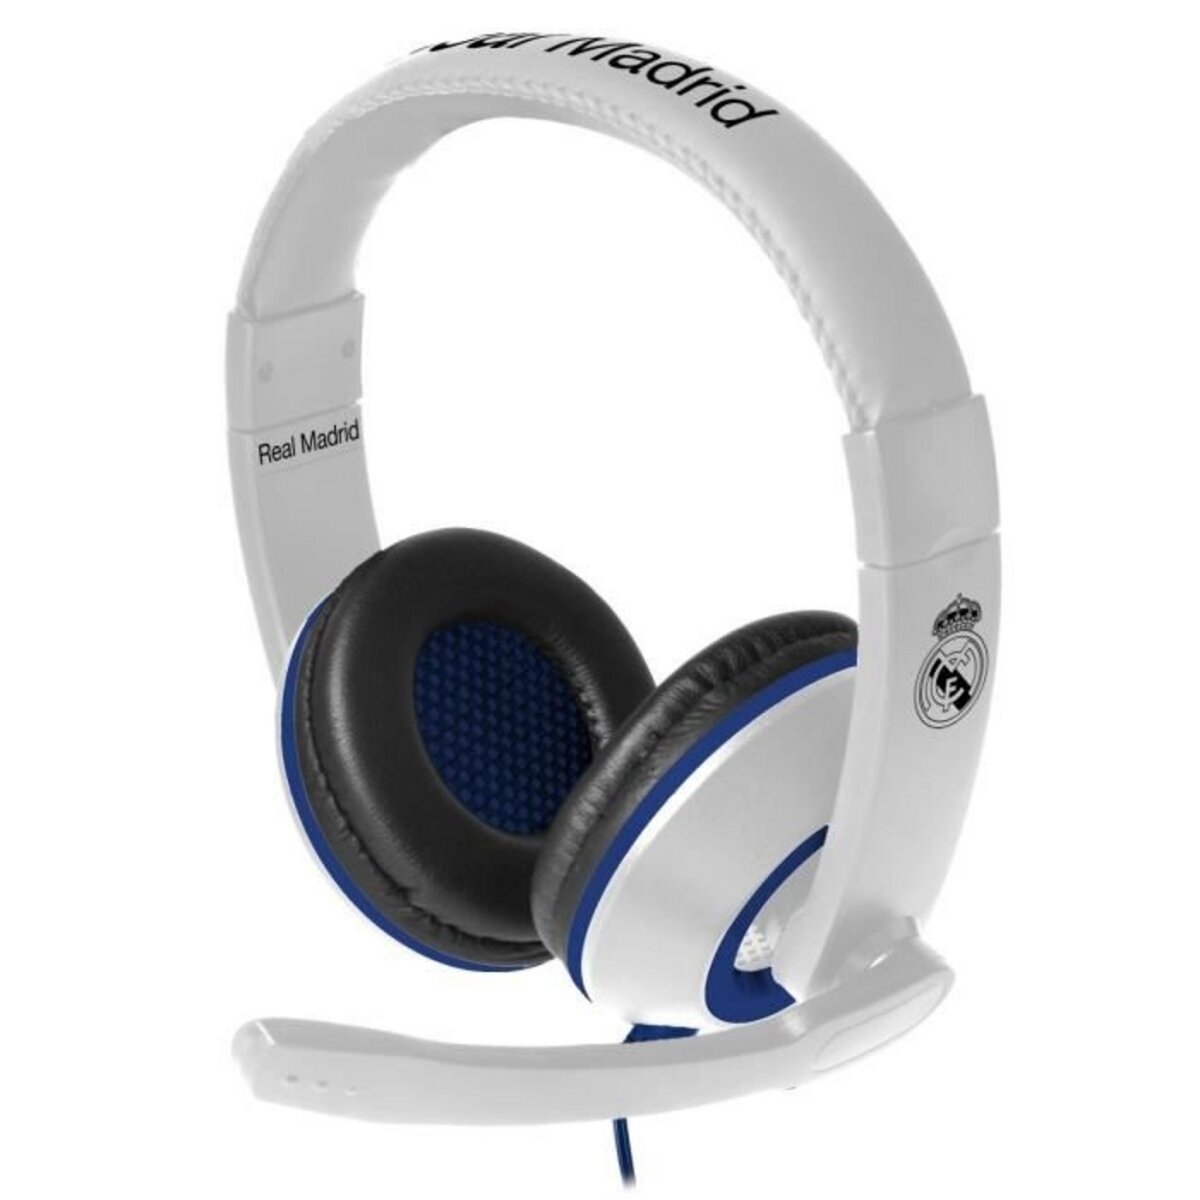 SUBSONIC Casque gaming pour PS4 et Xbox One - Real Madrid